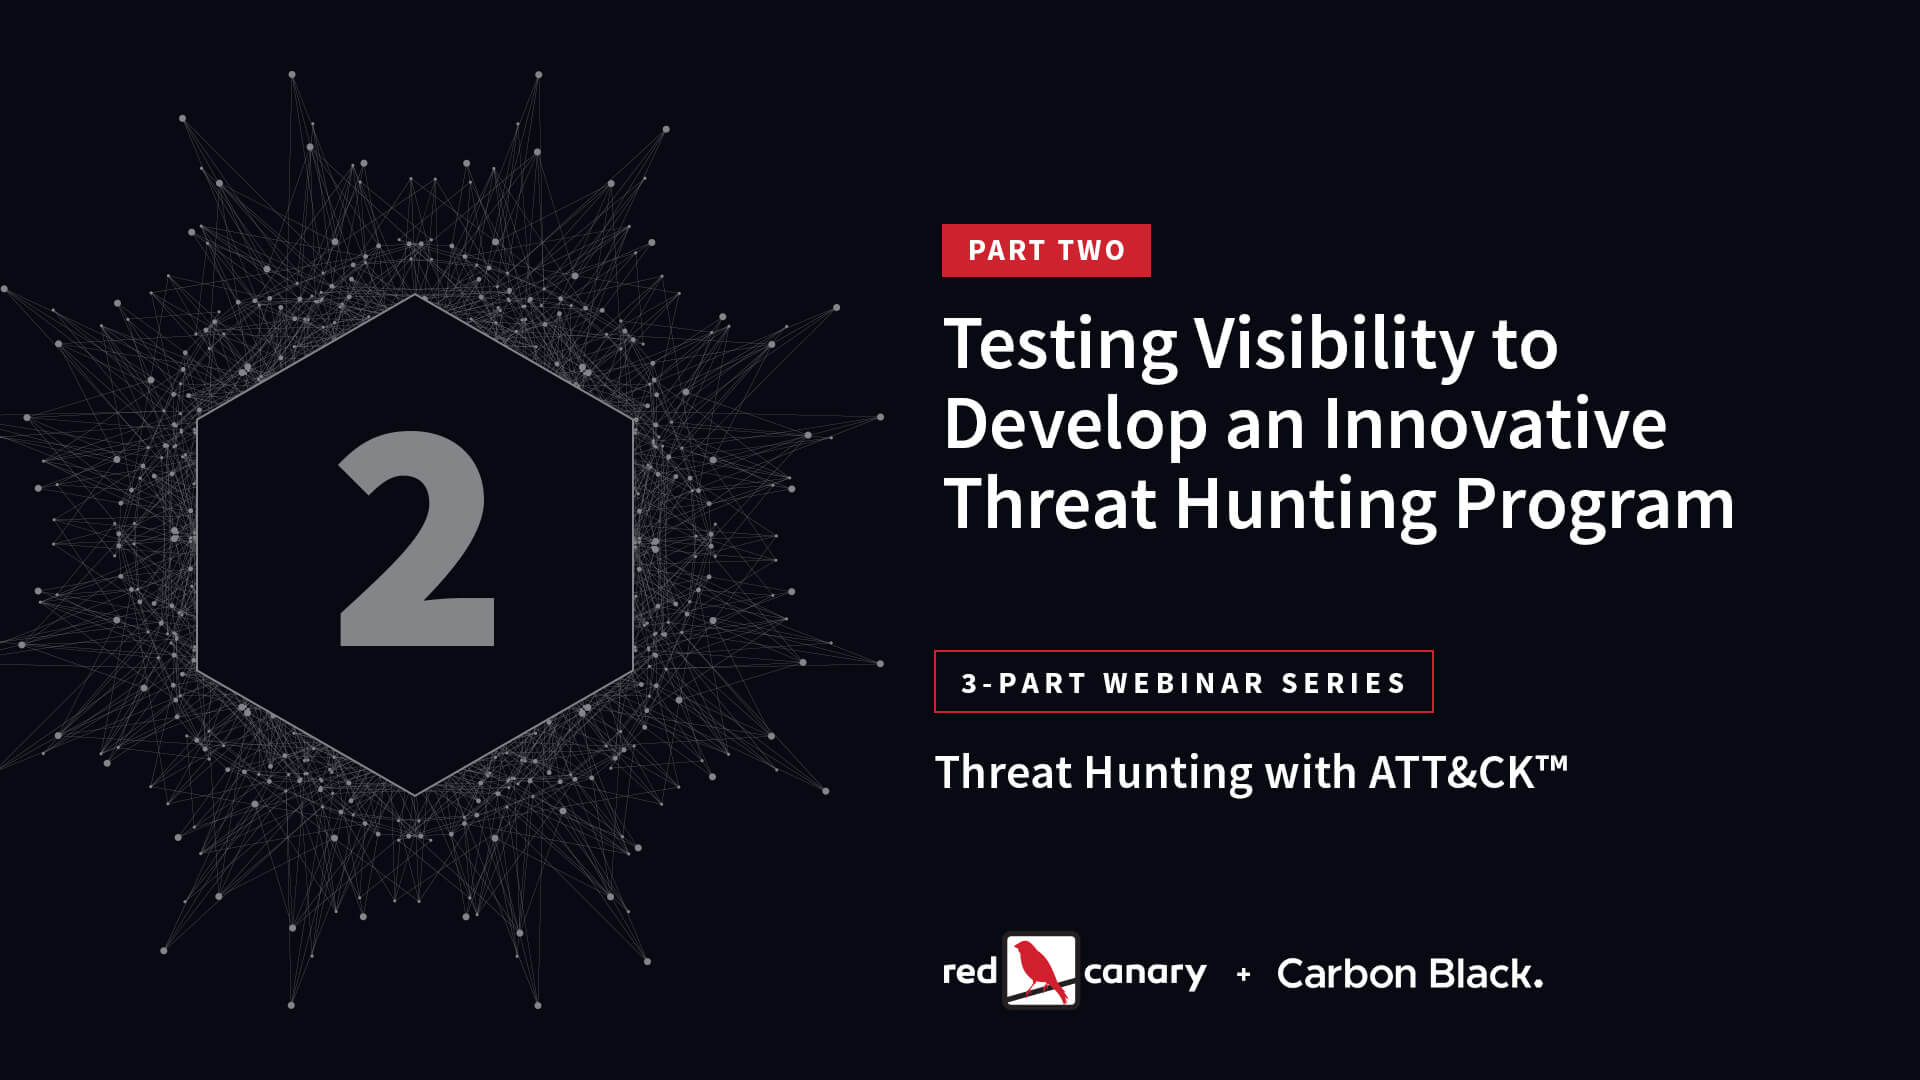 Threat Hunting with ATT&CK Theme – Part Two